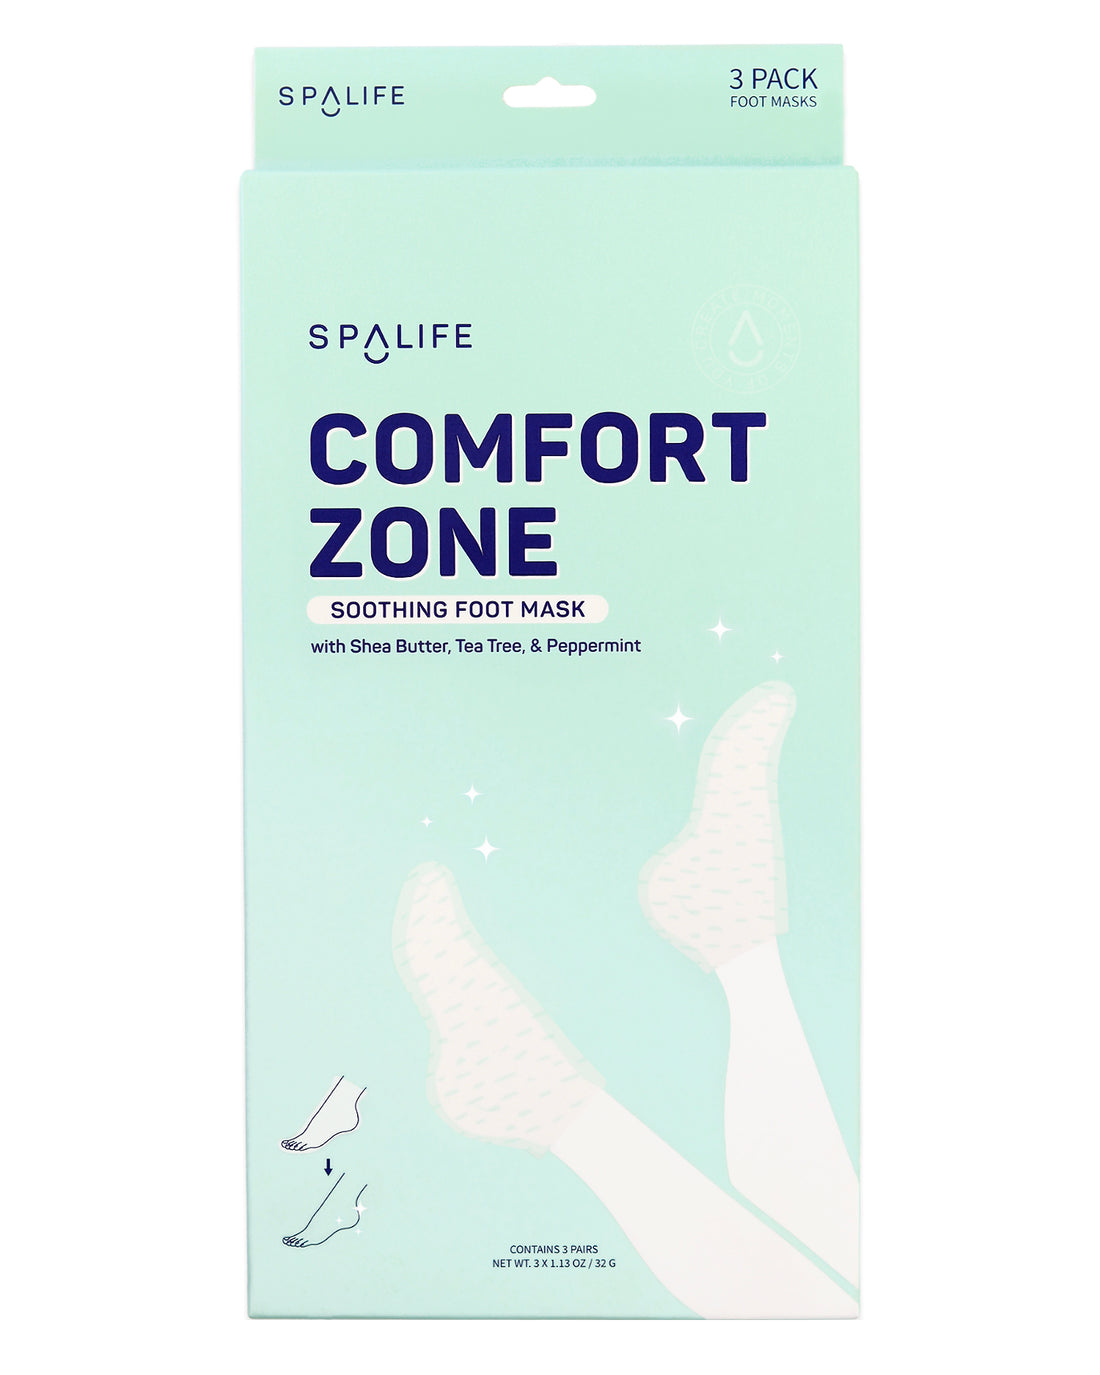 Comfort_zone_soothing_foot_mas-744